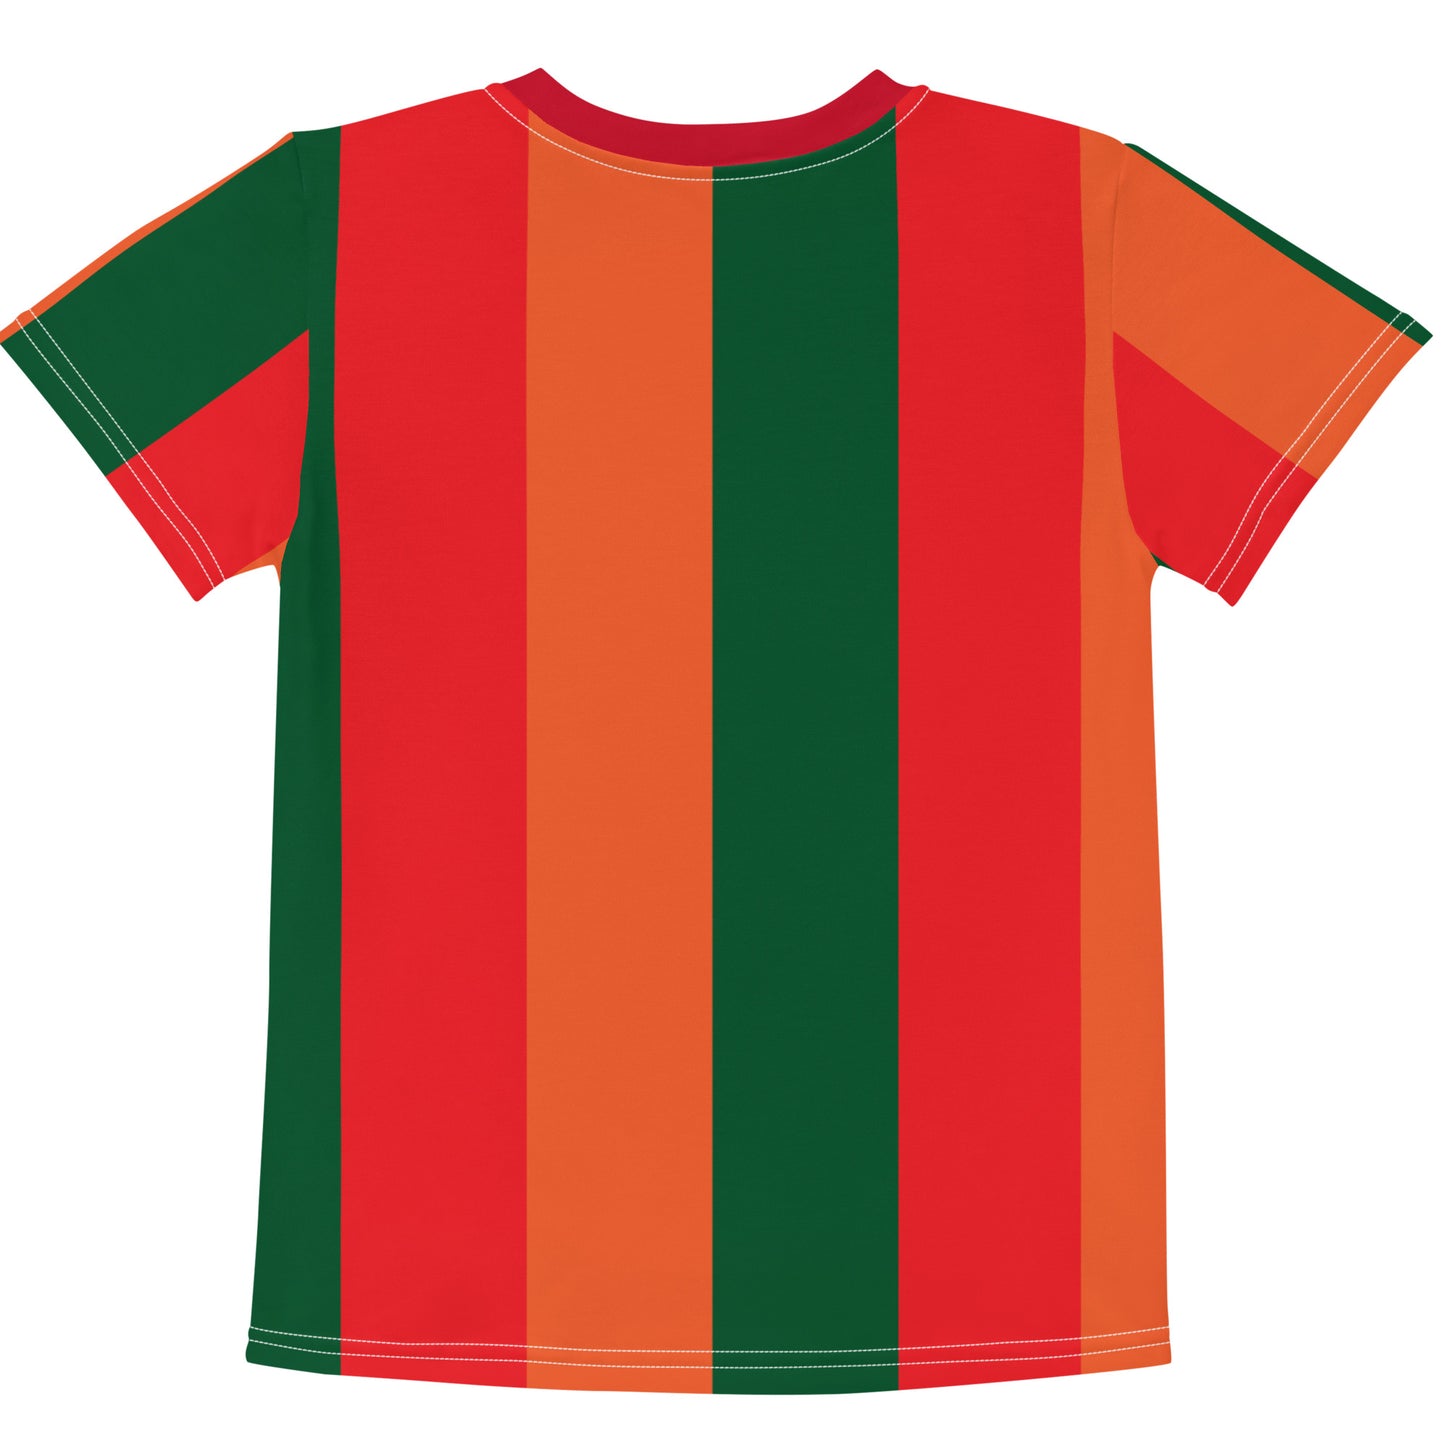 Swift Stripes - Inspired By Taylor Swift - Sustainably Made Kids t-shirt